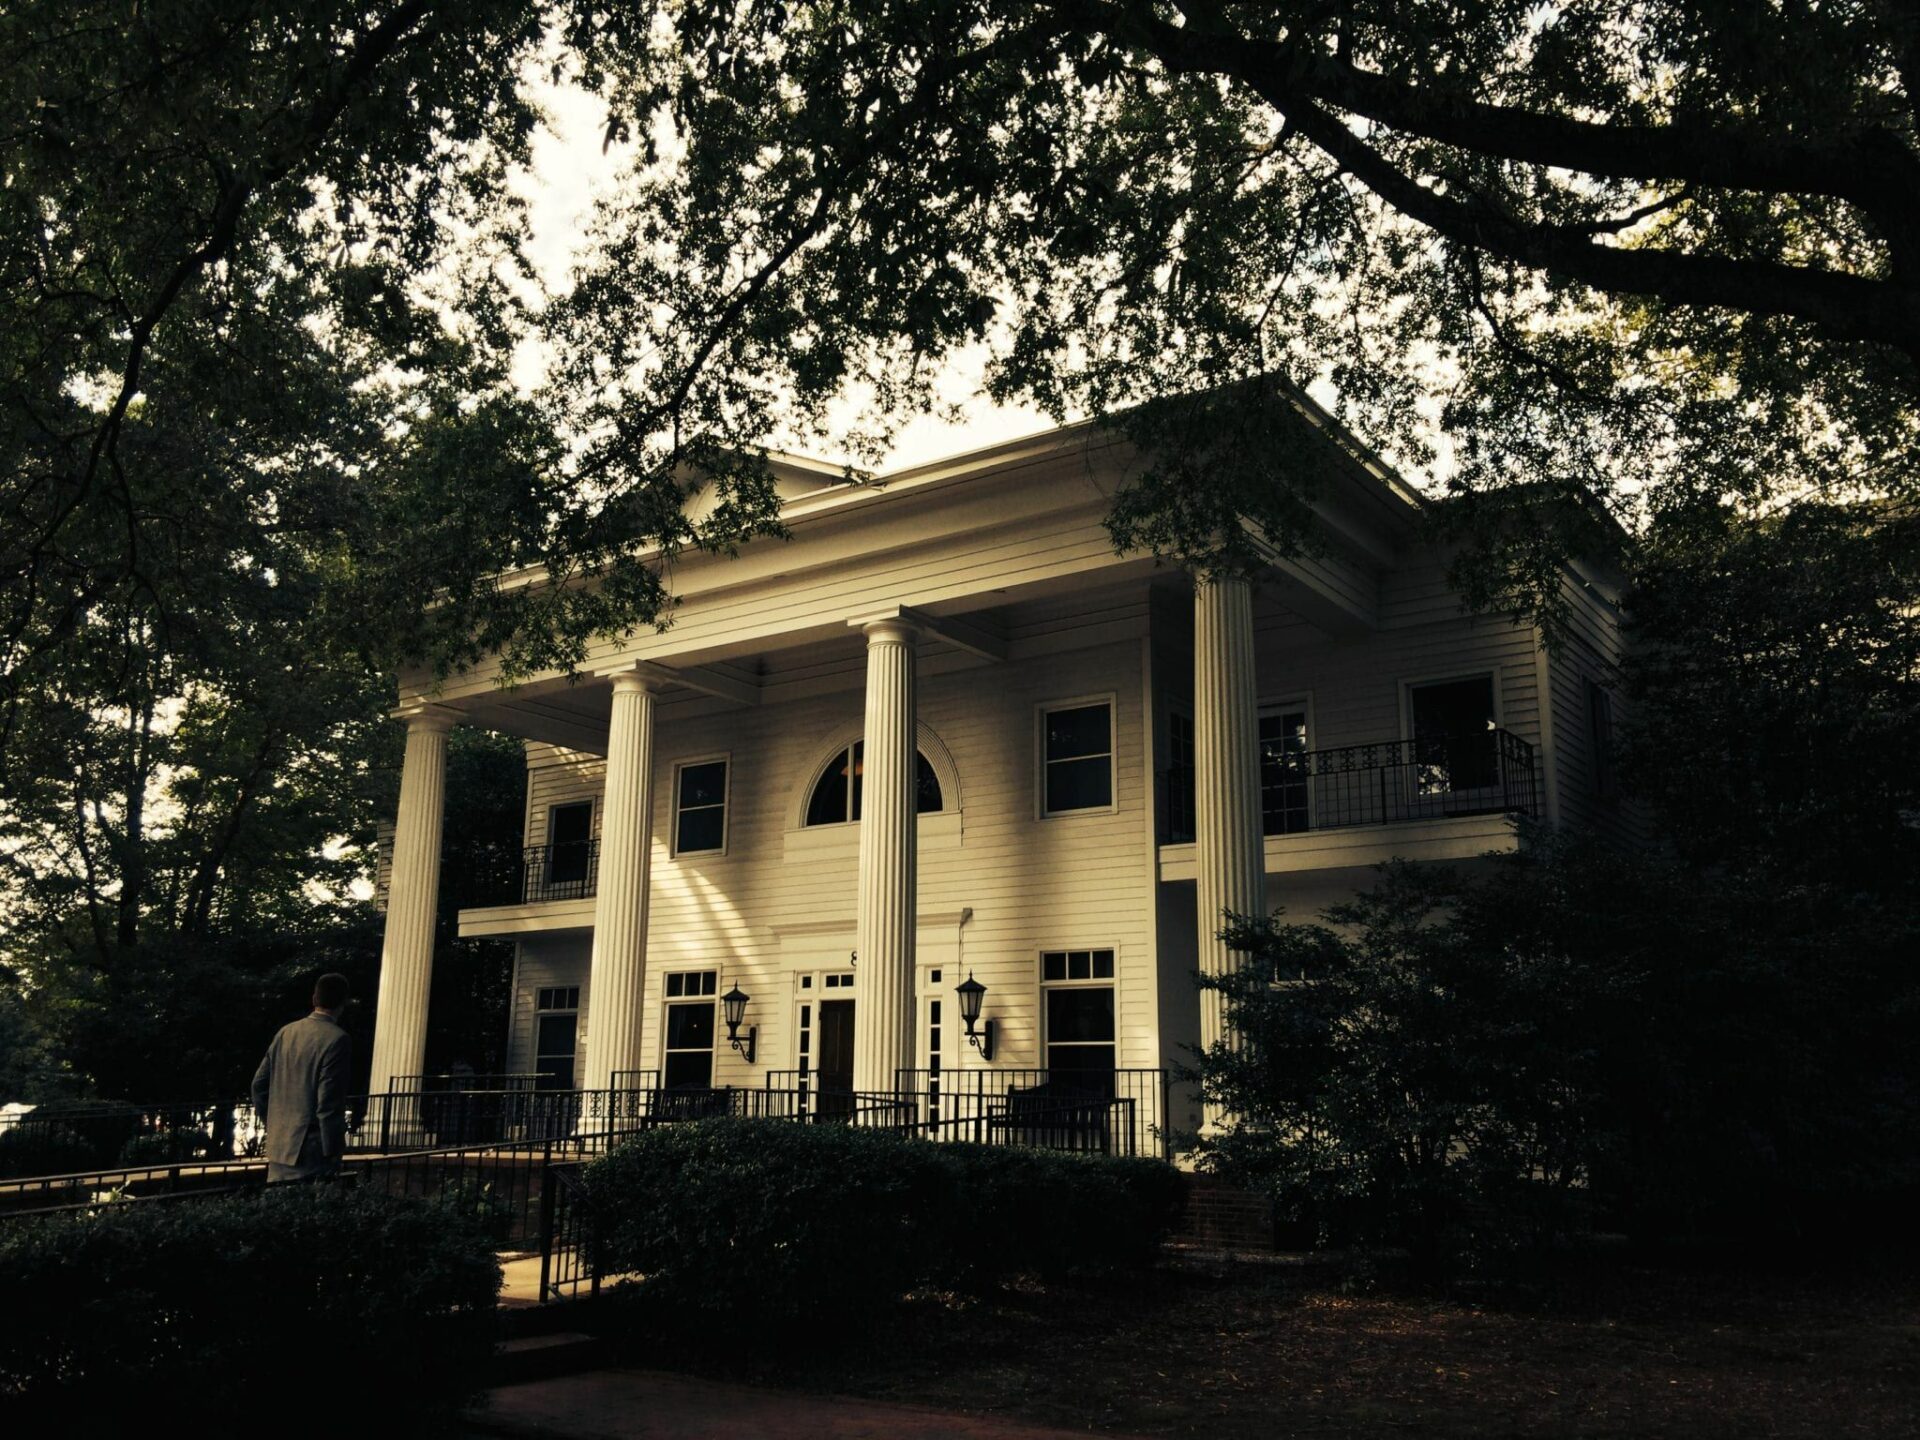 A large white house with columns in North Carolina.